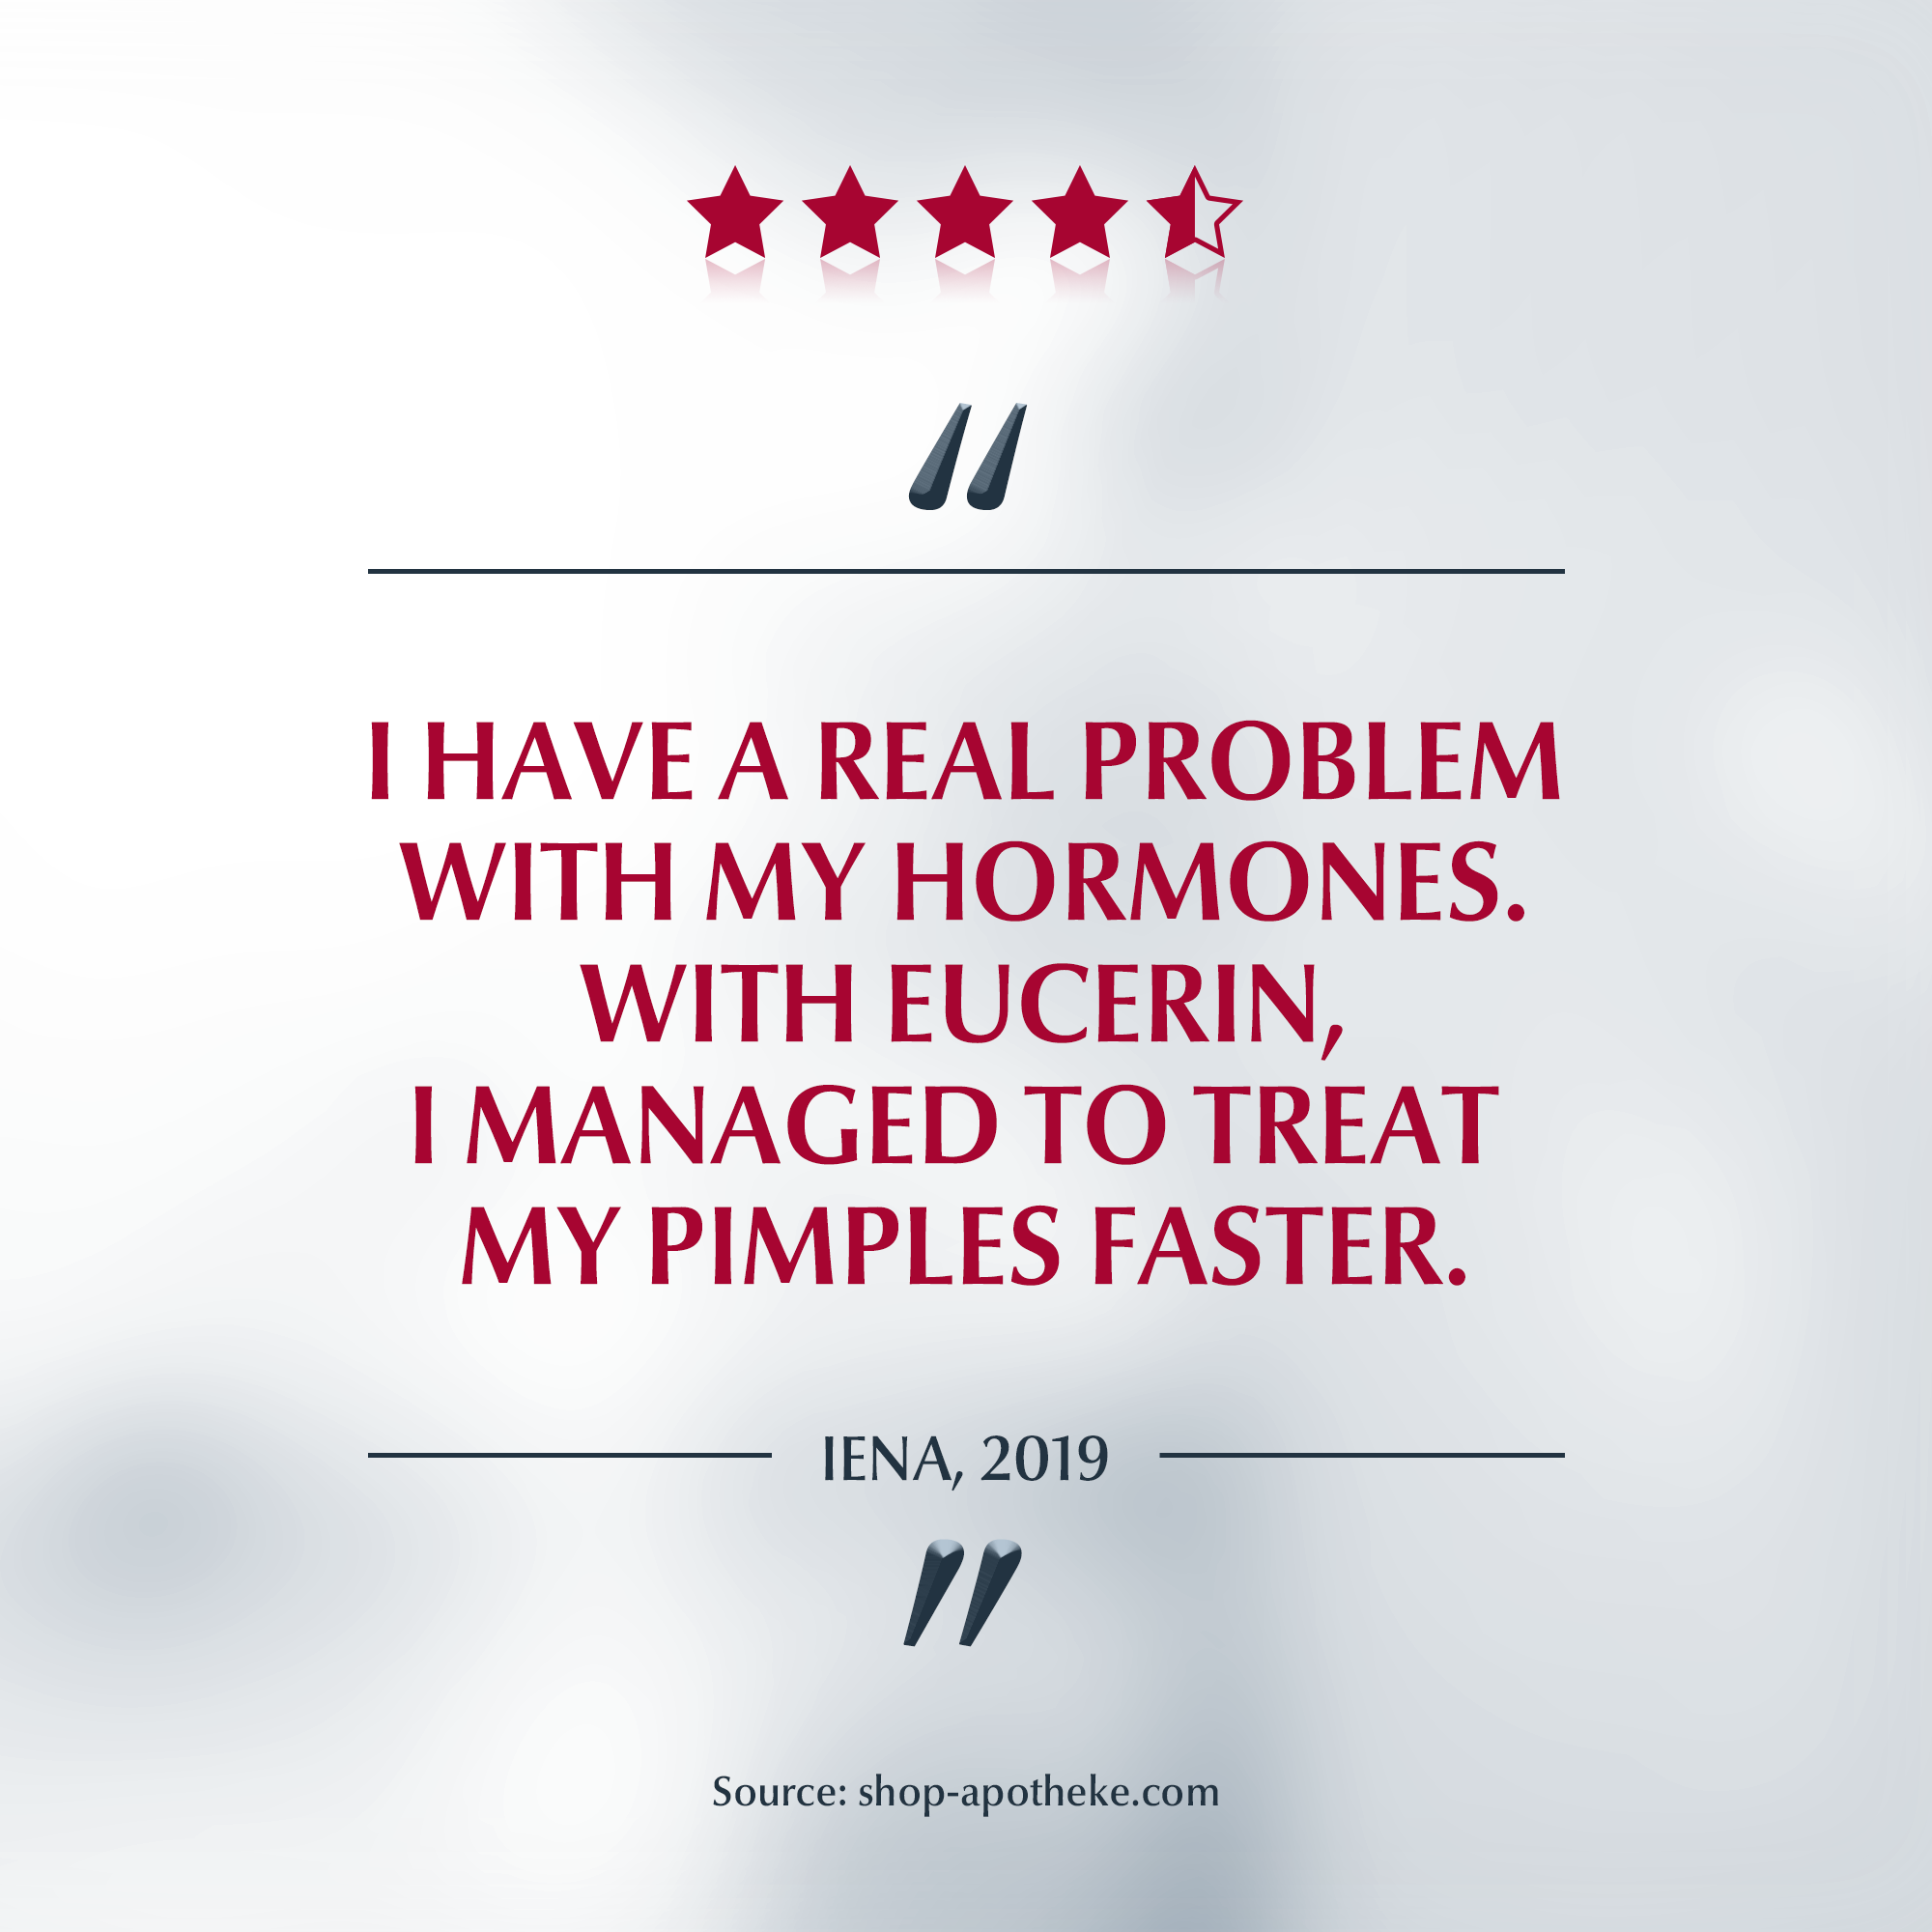 dermo purifyer cleansing gel quote